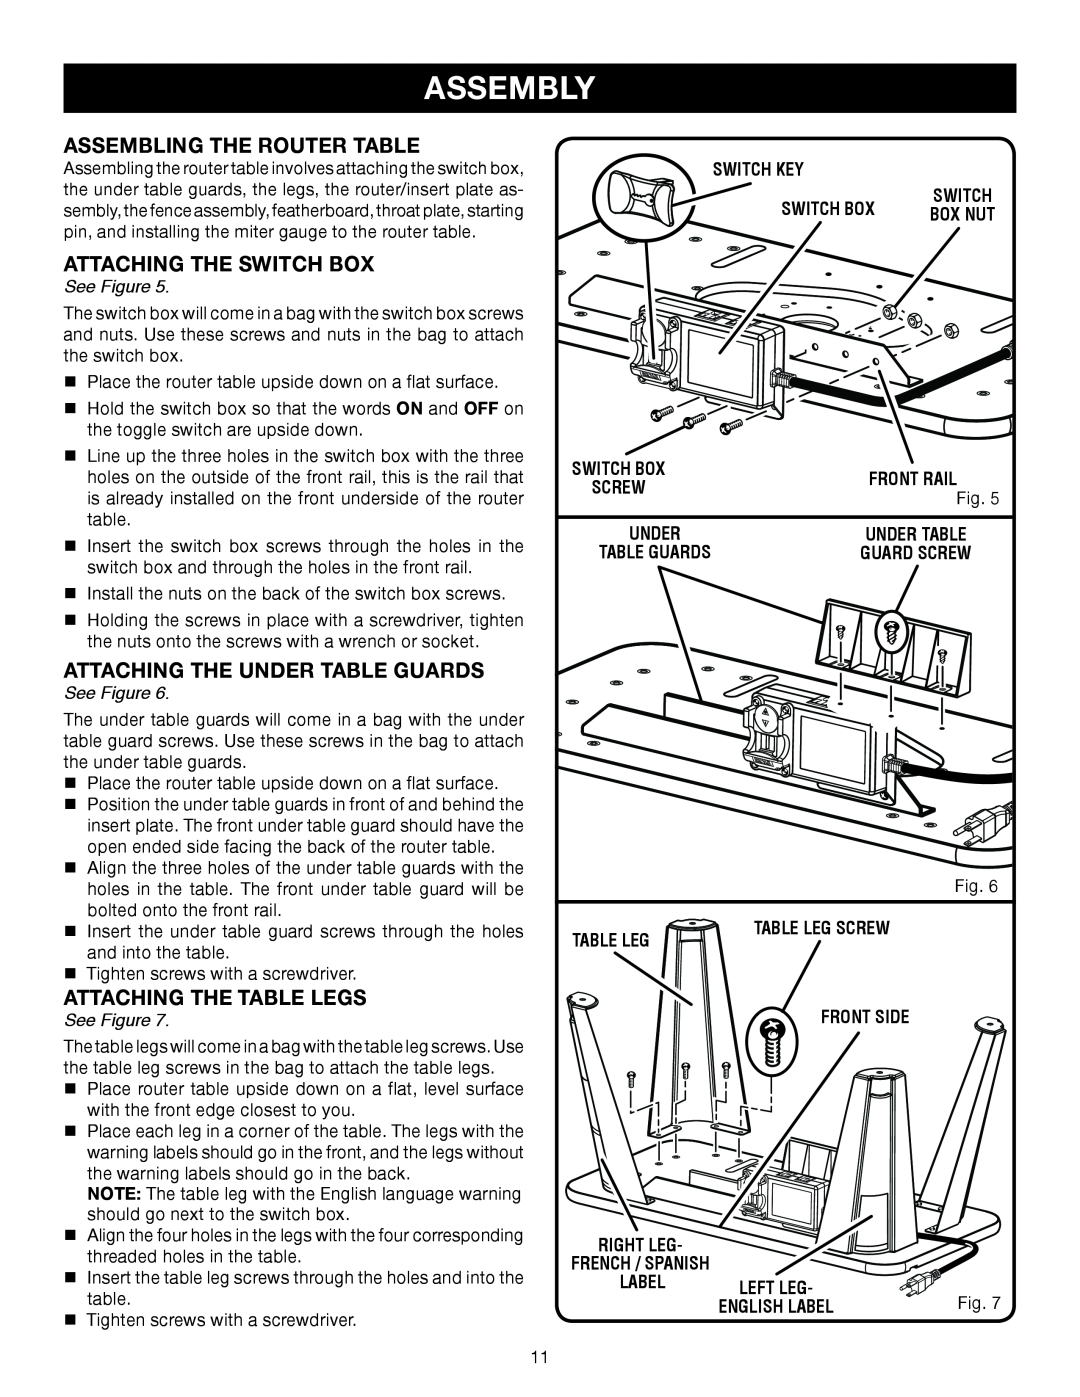 Ryobi A25RT02 manual Assembling The Router Table, Attaching The Switch Box, Attaching The Under Table Guards, Assembly 